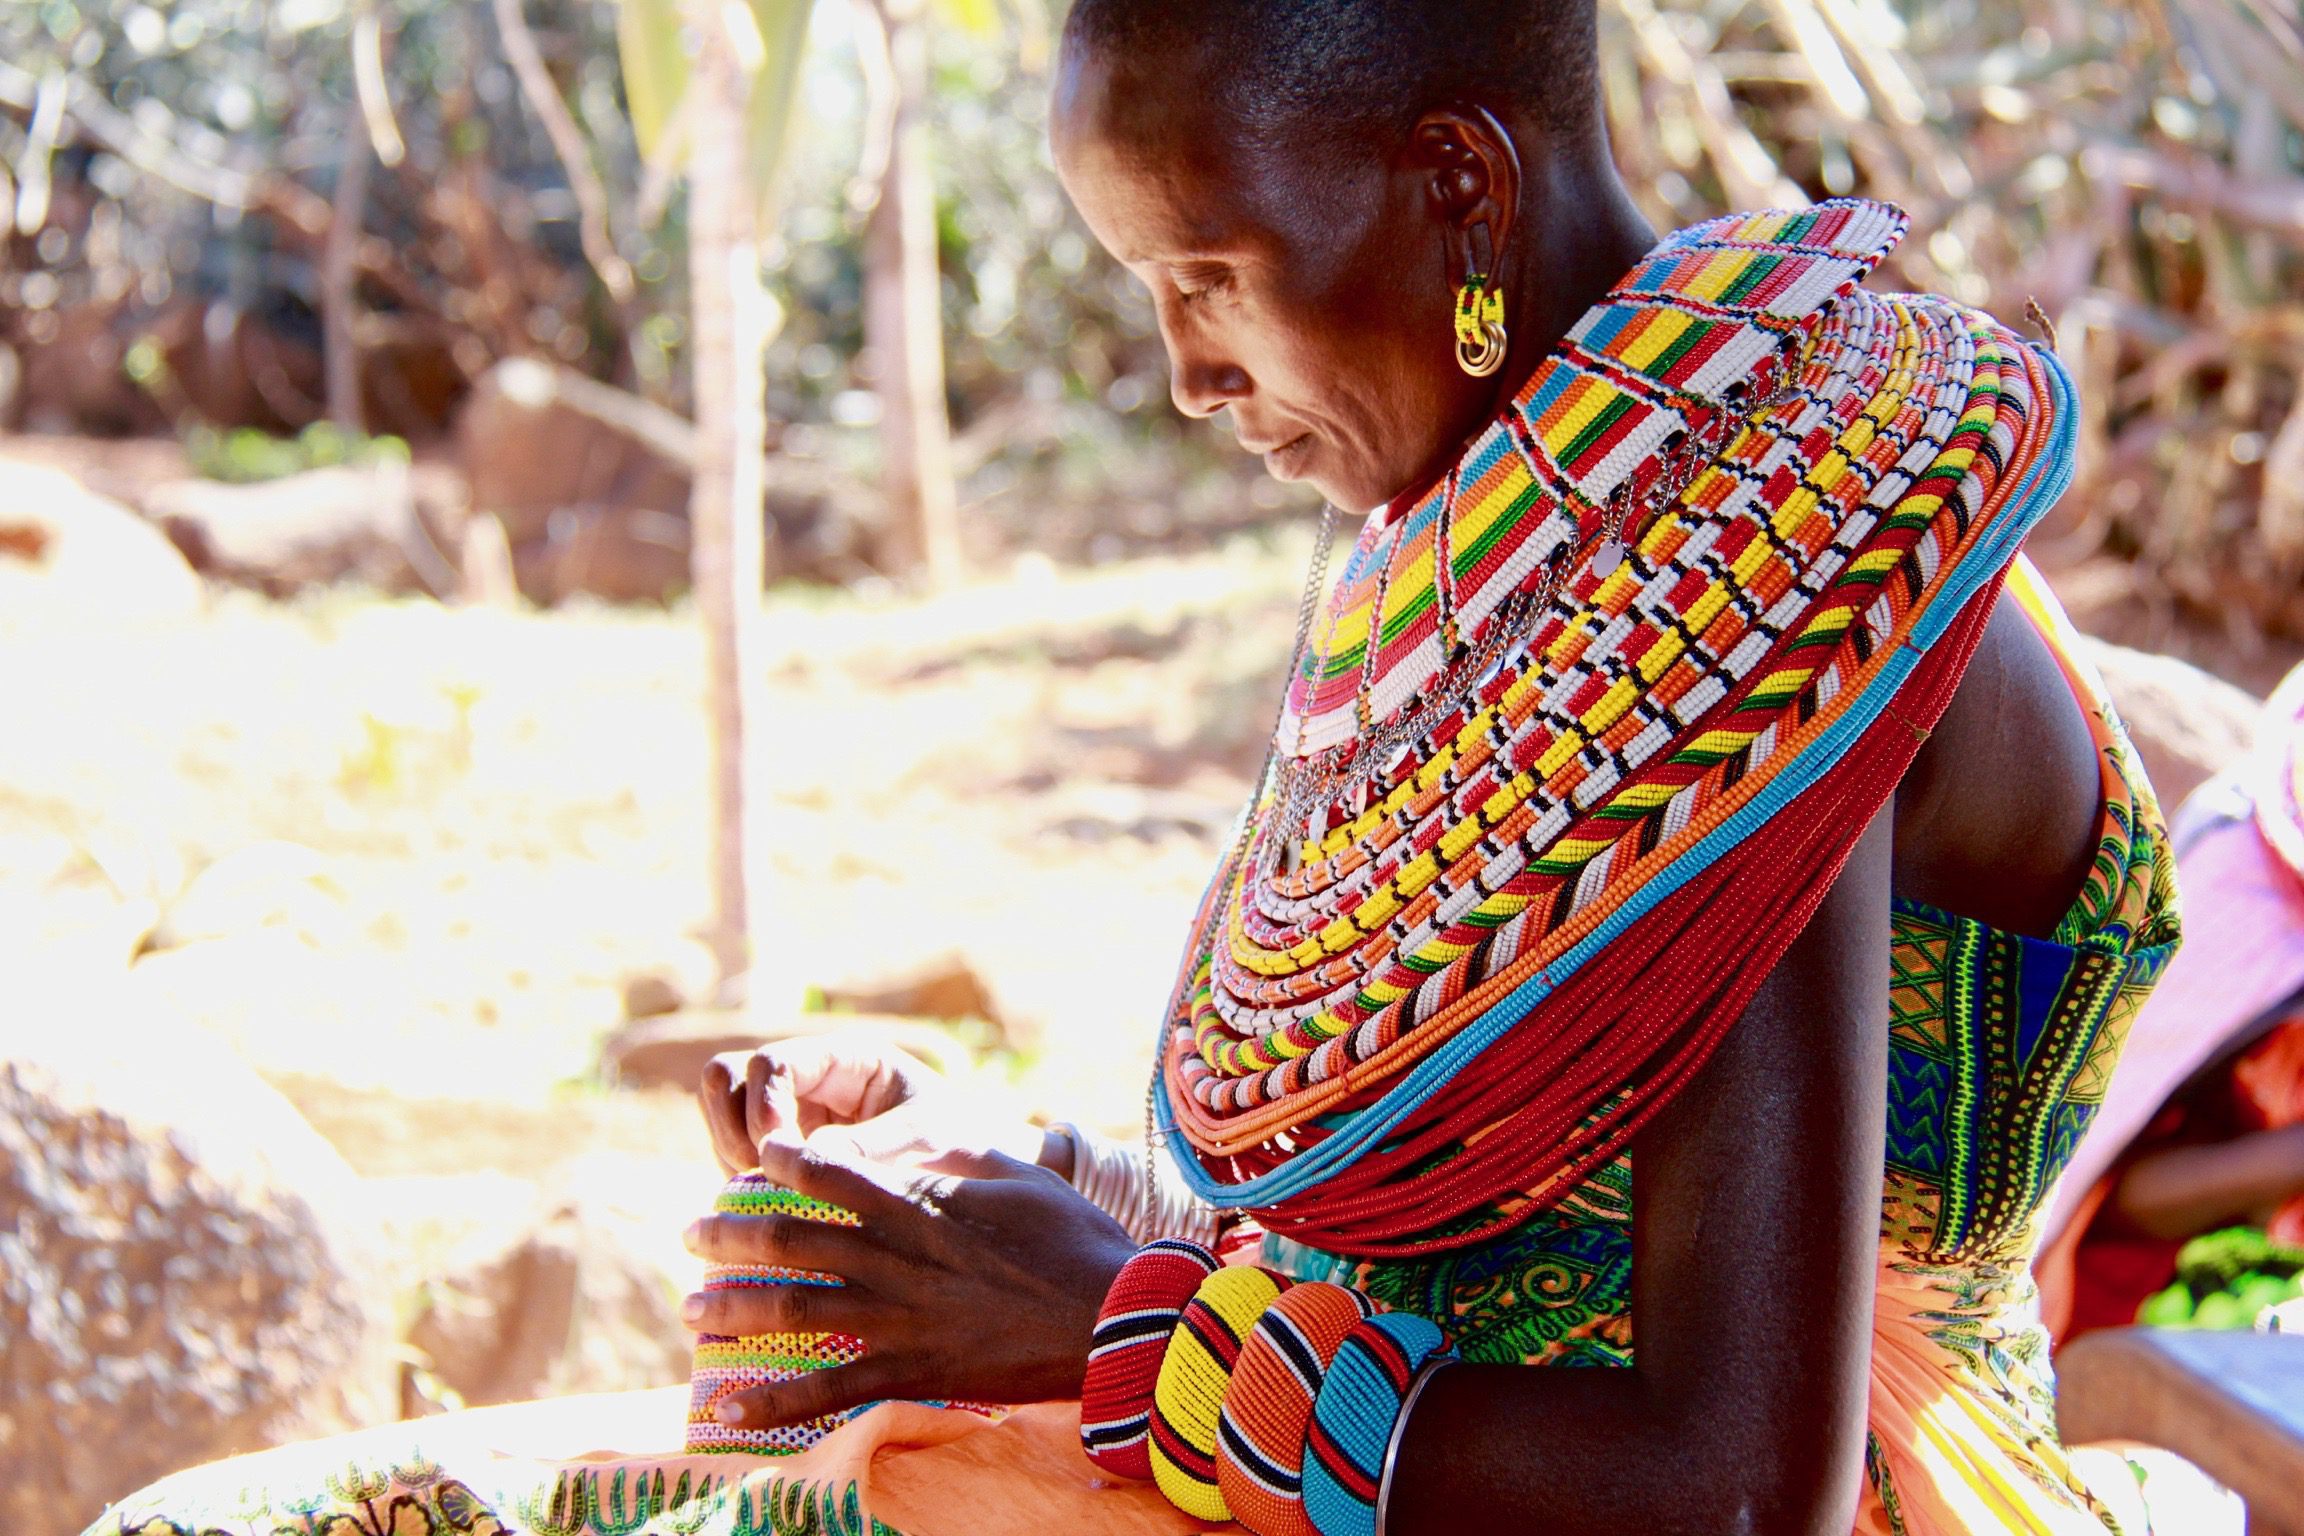 4 favorite activities in Kenya, a samburu woman with an intricately beaded collar focuses on her beading.